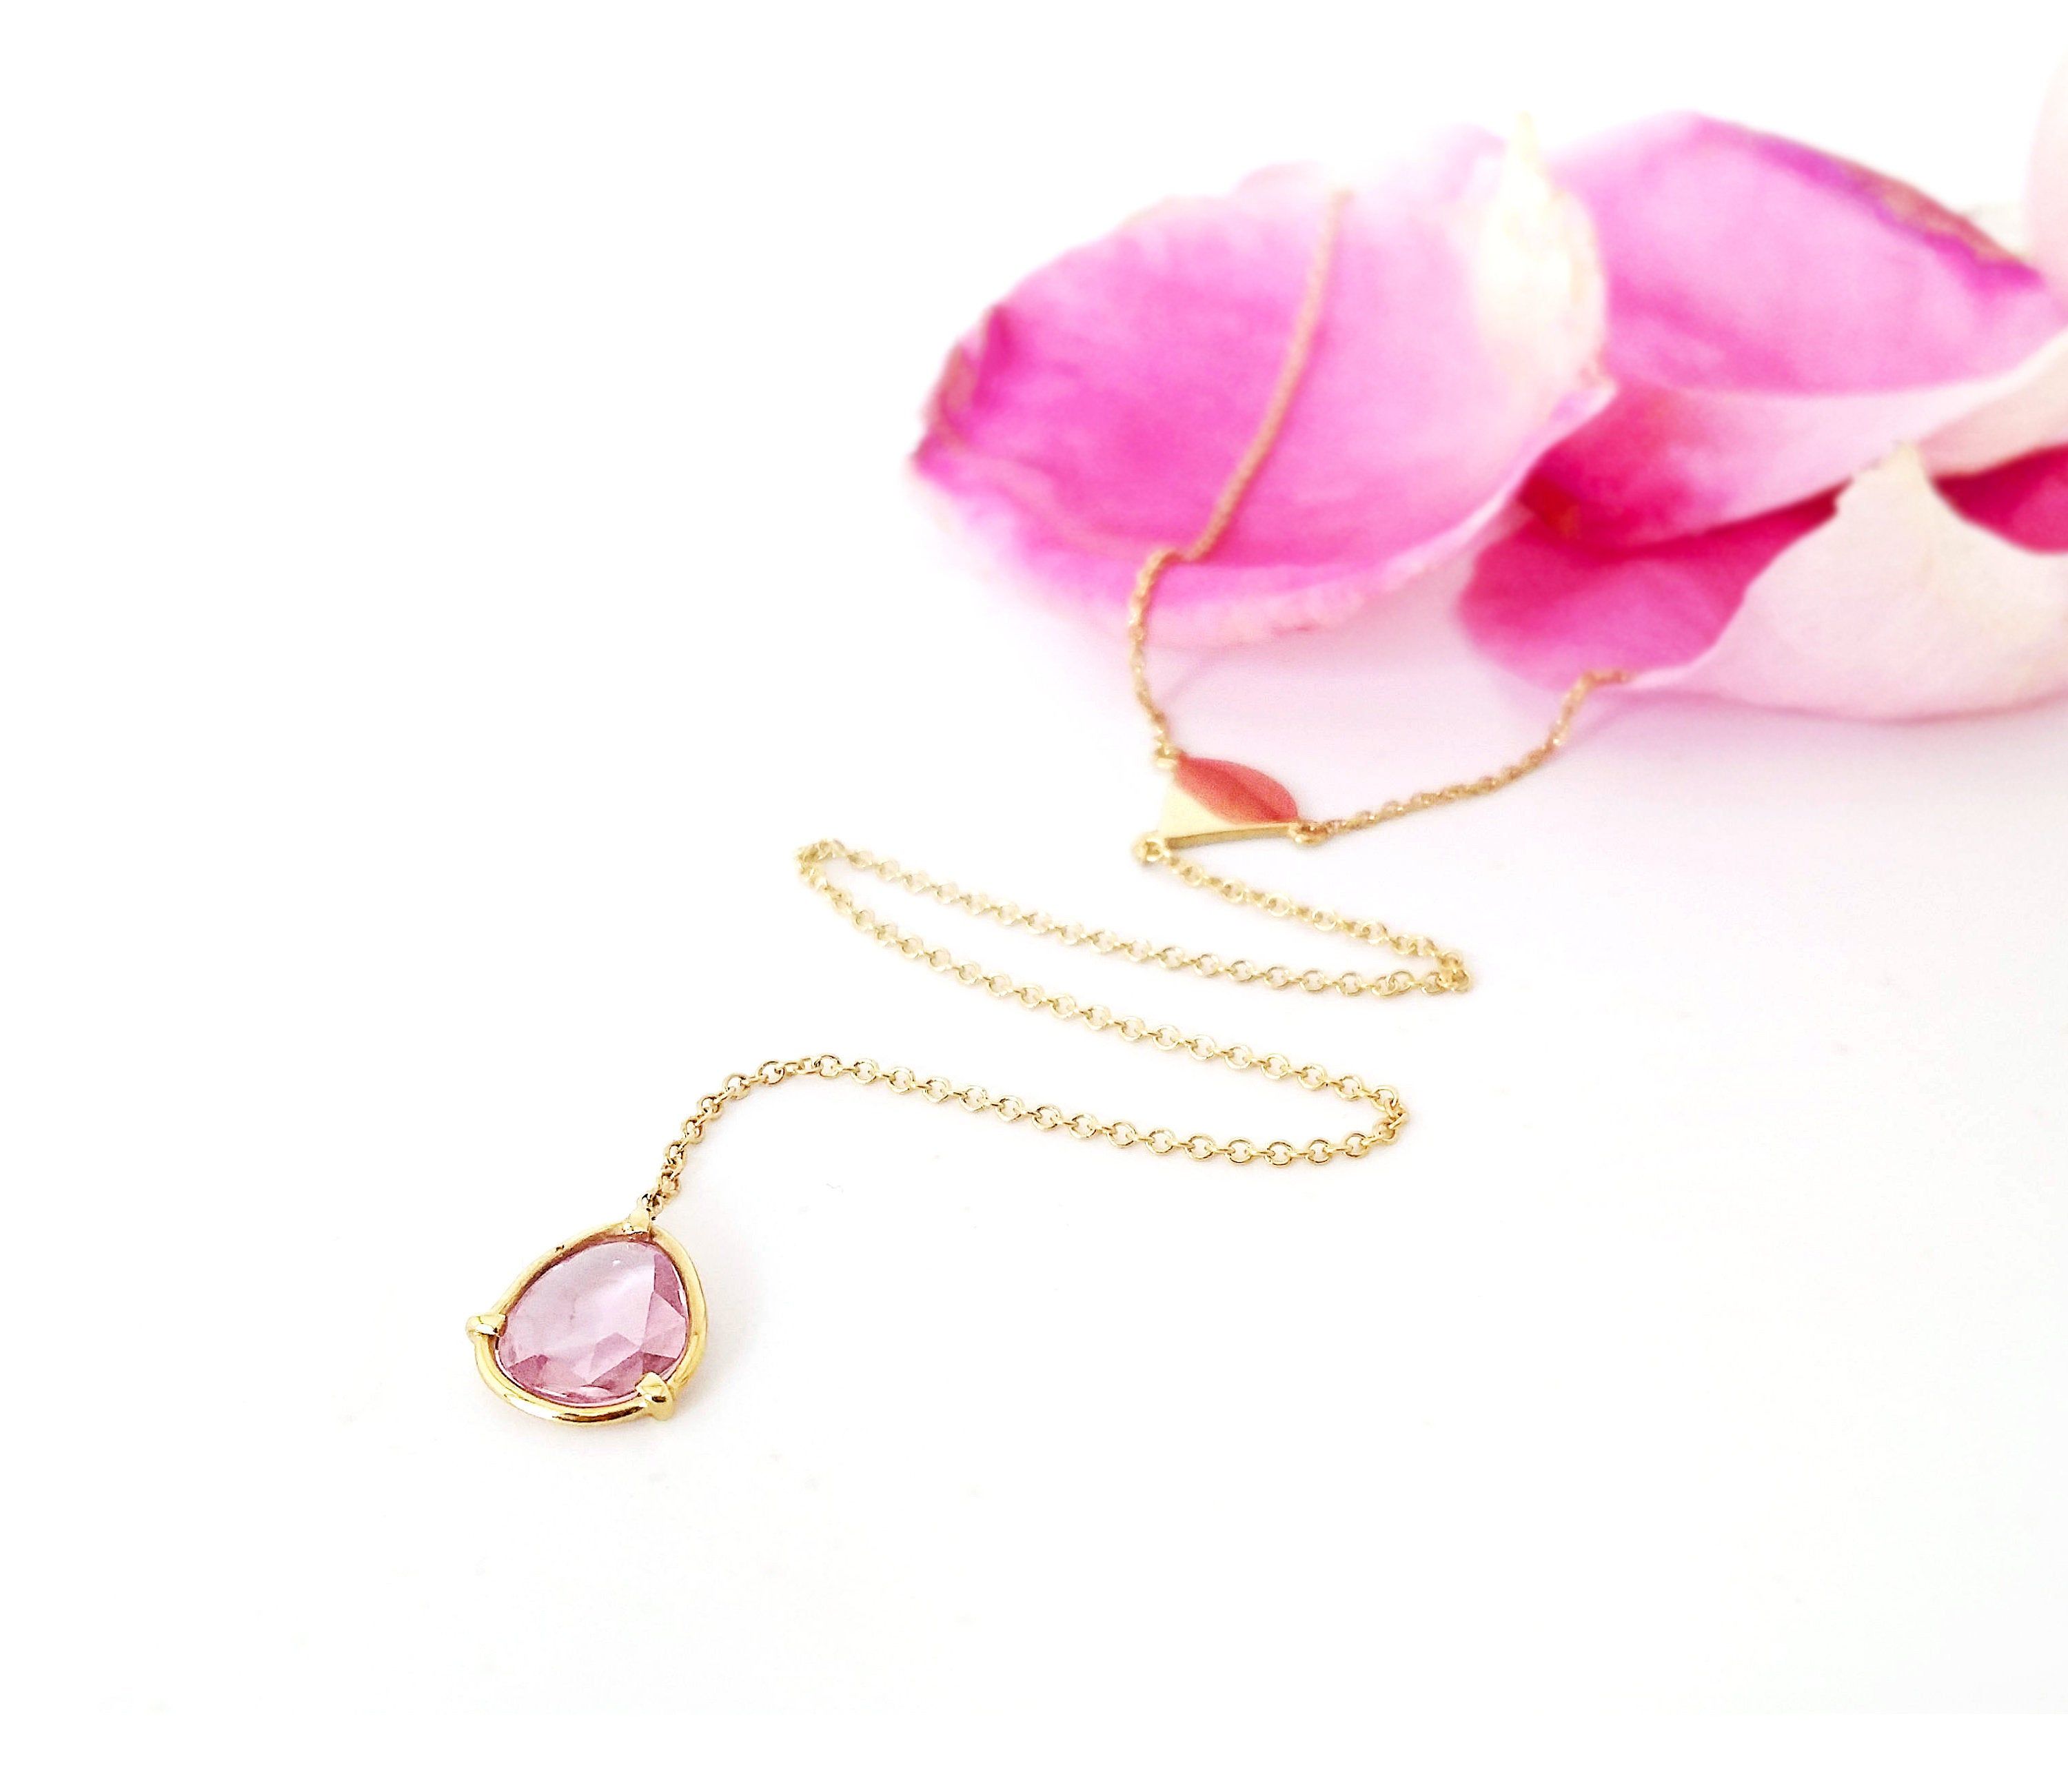 14k Solid Gold Y Necklace, Pink Sapphire Necklace, 14k Gold Lariat  Necklace, Dainty Y Necklace, Simple Lariat Necklace, Gift For Girlfriend Intended For Newest Lariat Pink Sapphire And Diamond Necklaces (View 19 of 25)